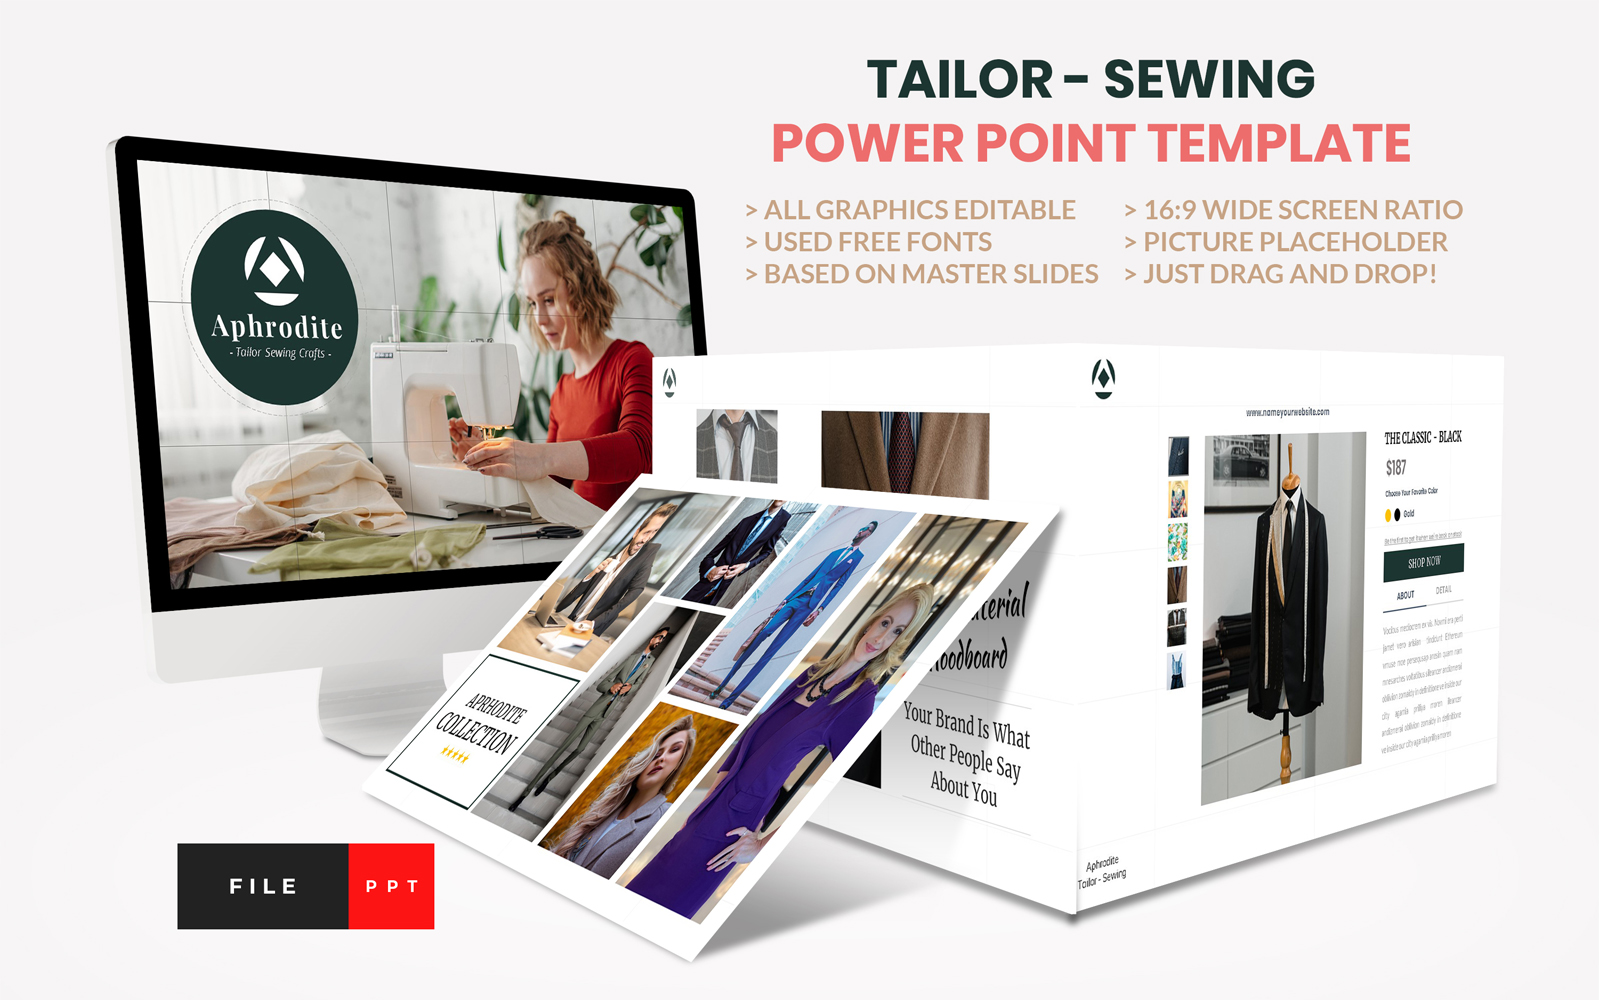 Tailor - Sewing Fashion Craft Power Point template